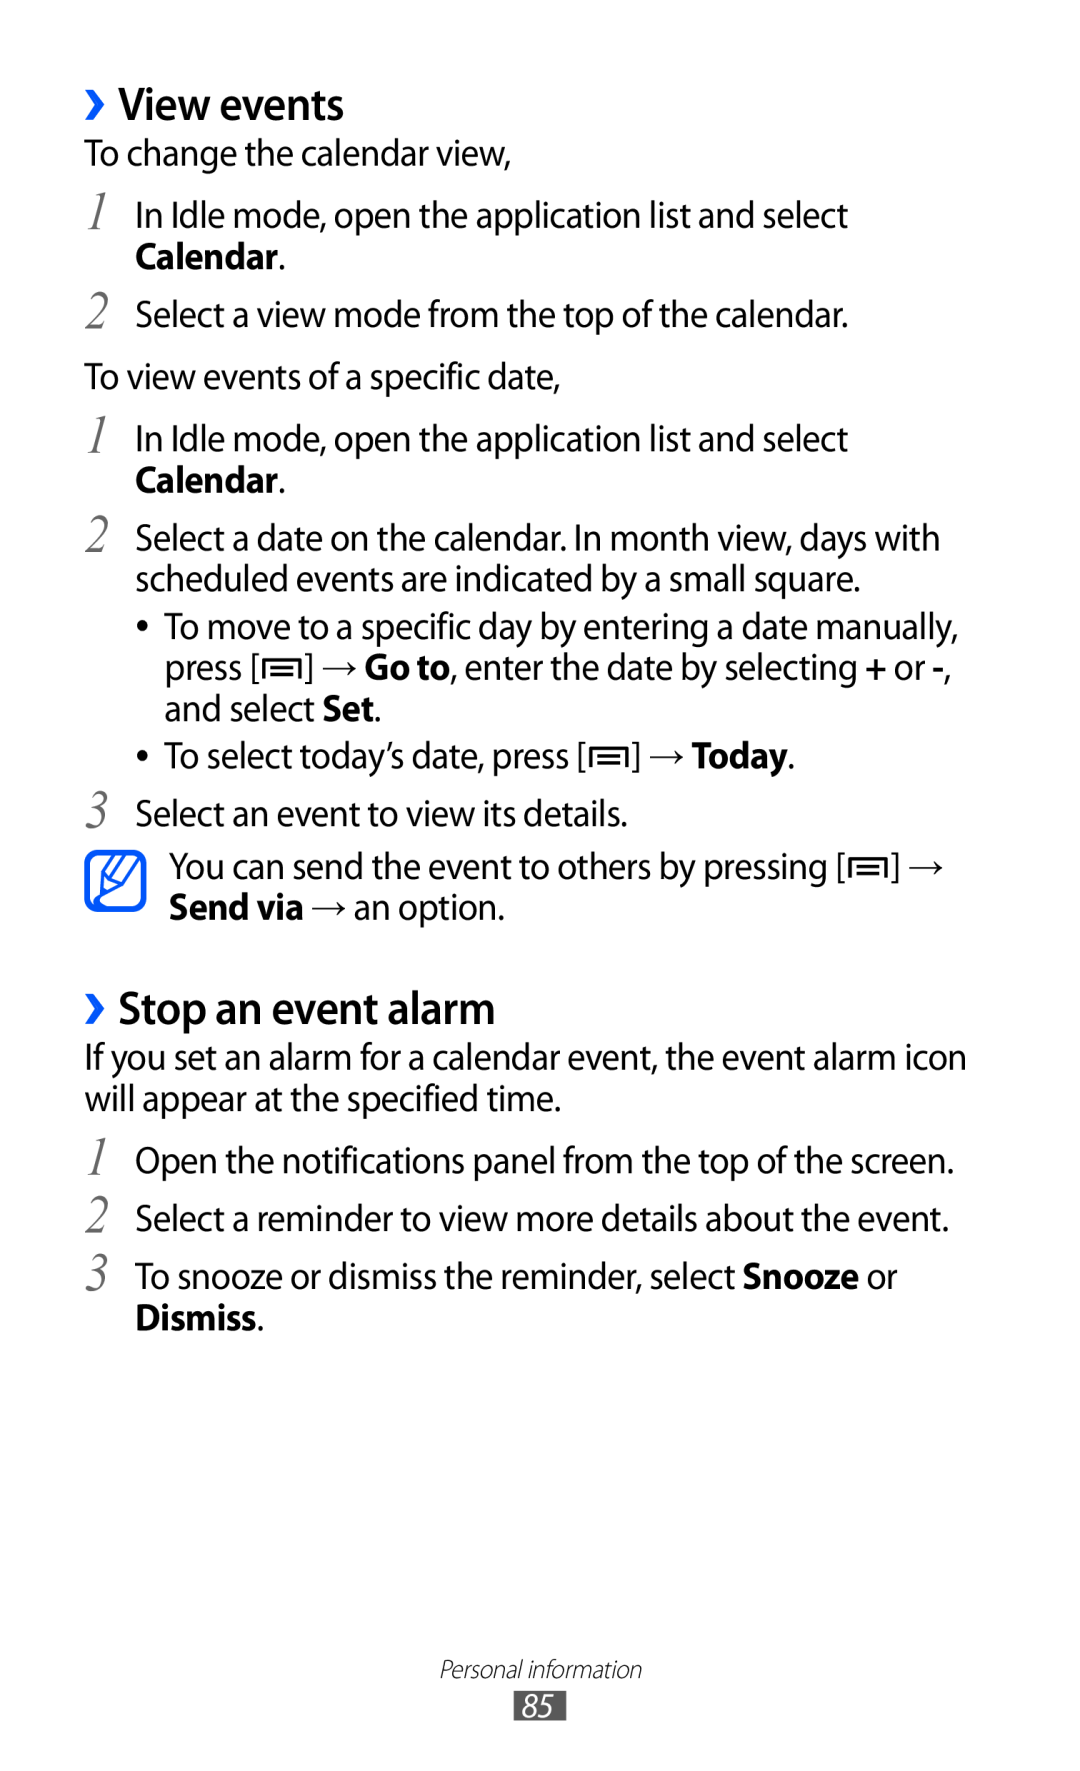 Samsung GT-I9070 user manual ››View events, ››Stop an event alarm, Dismiss 